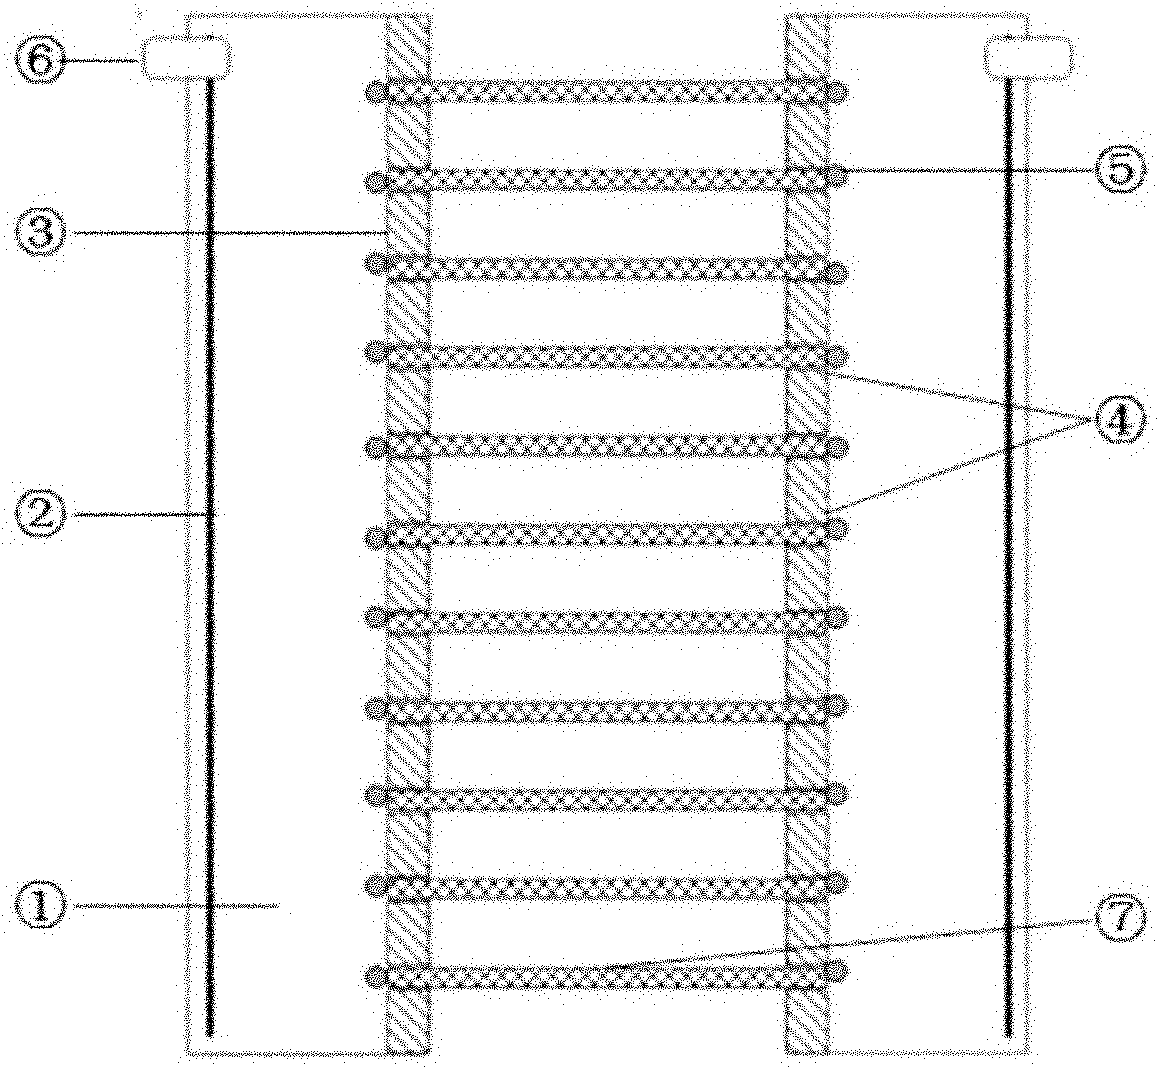 Miniature capillary array device for isoelectric focusing electrophoresis